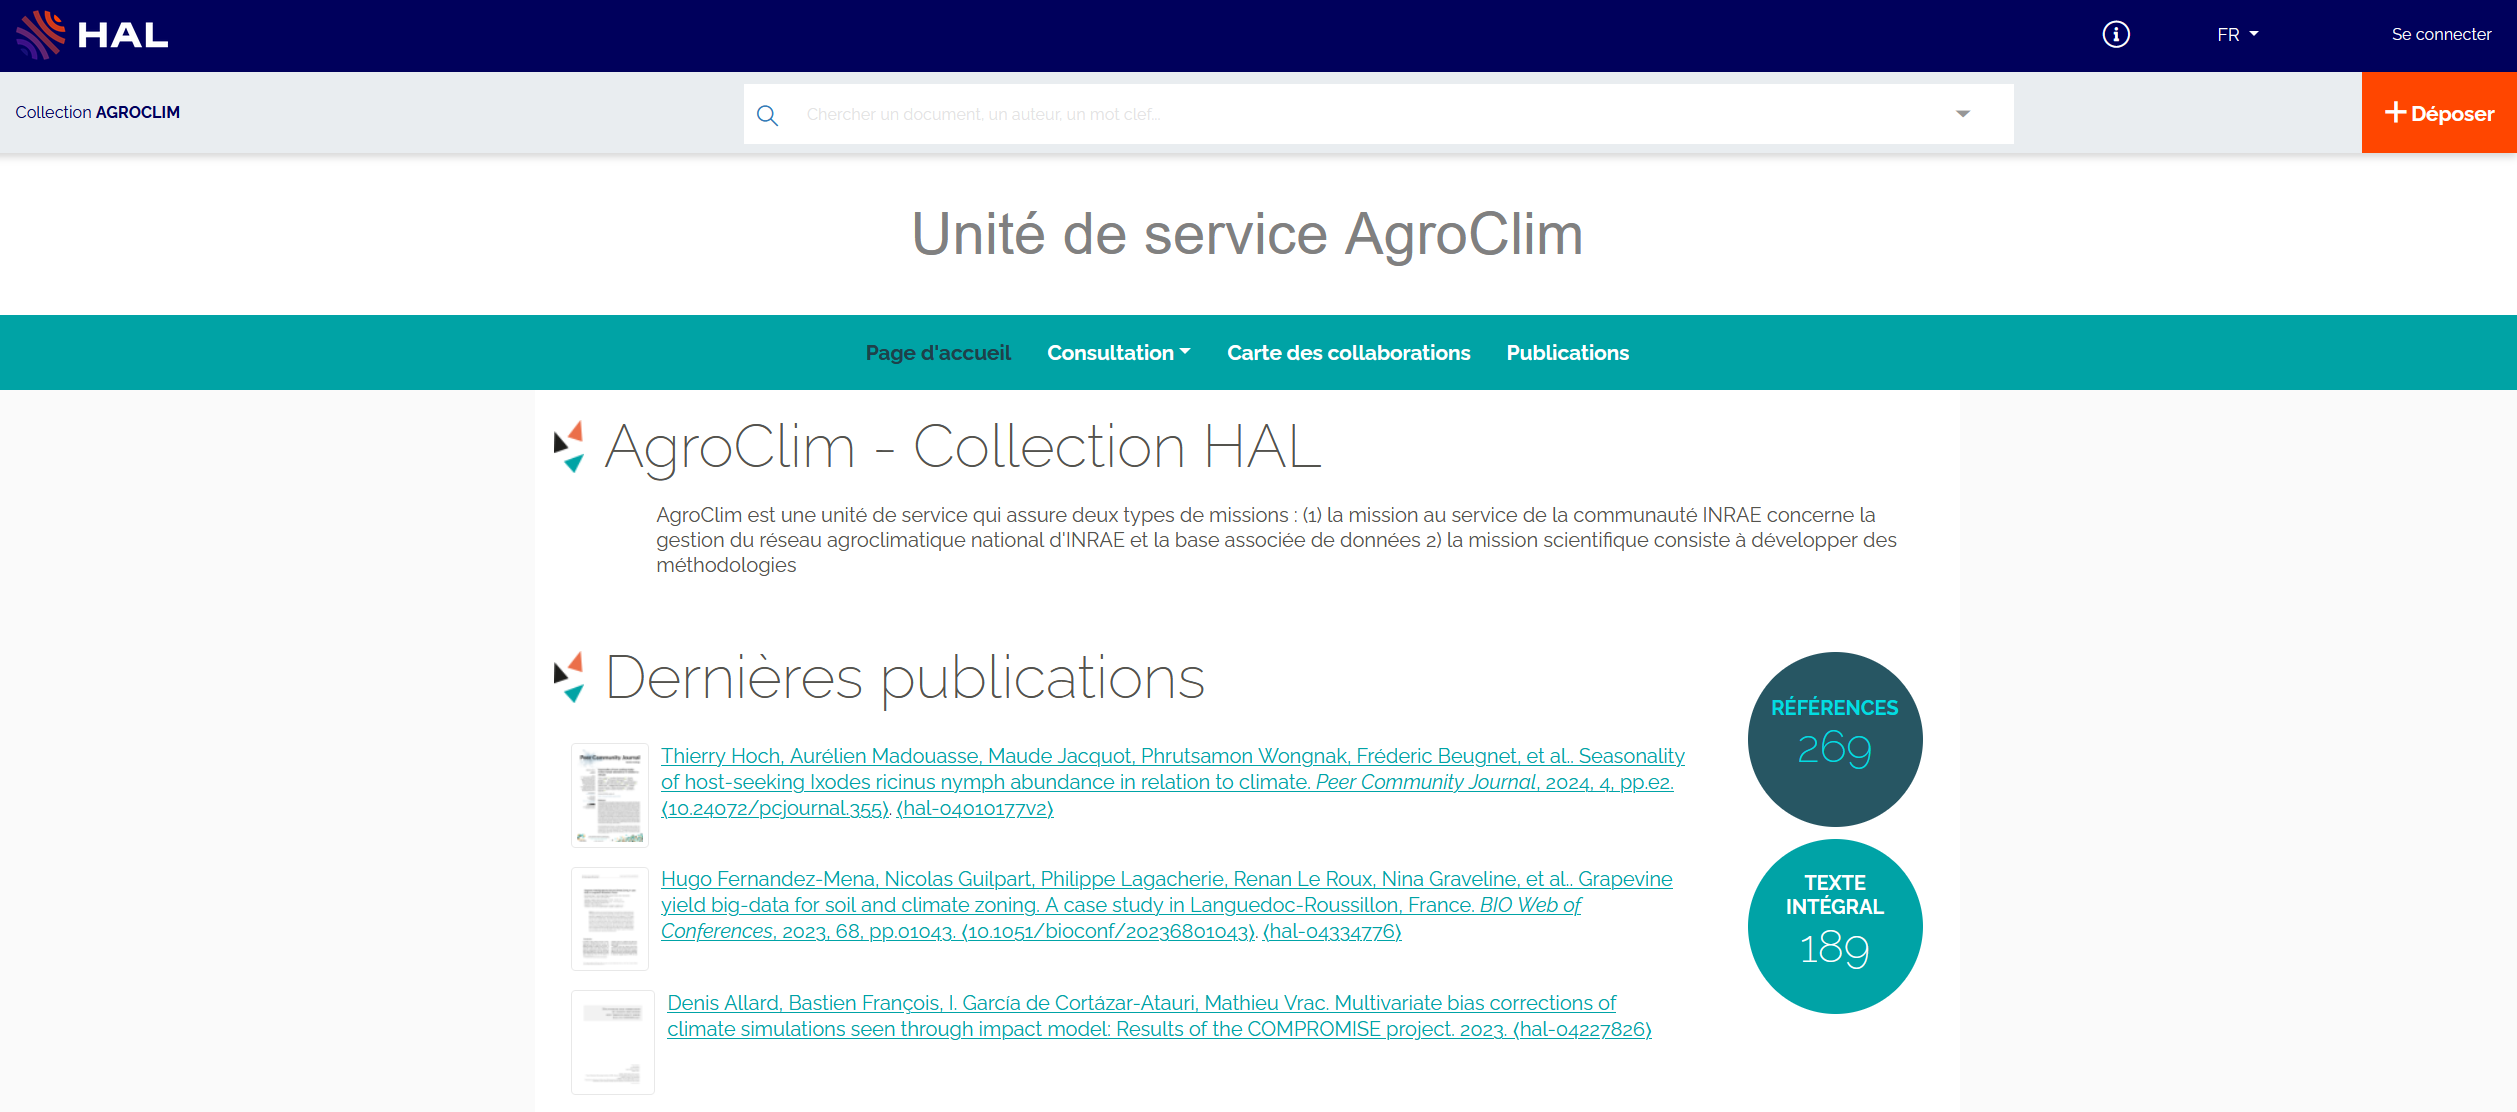 AgroClim - Collection HAL